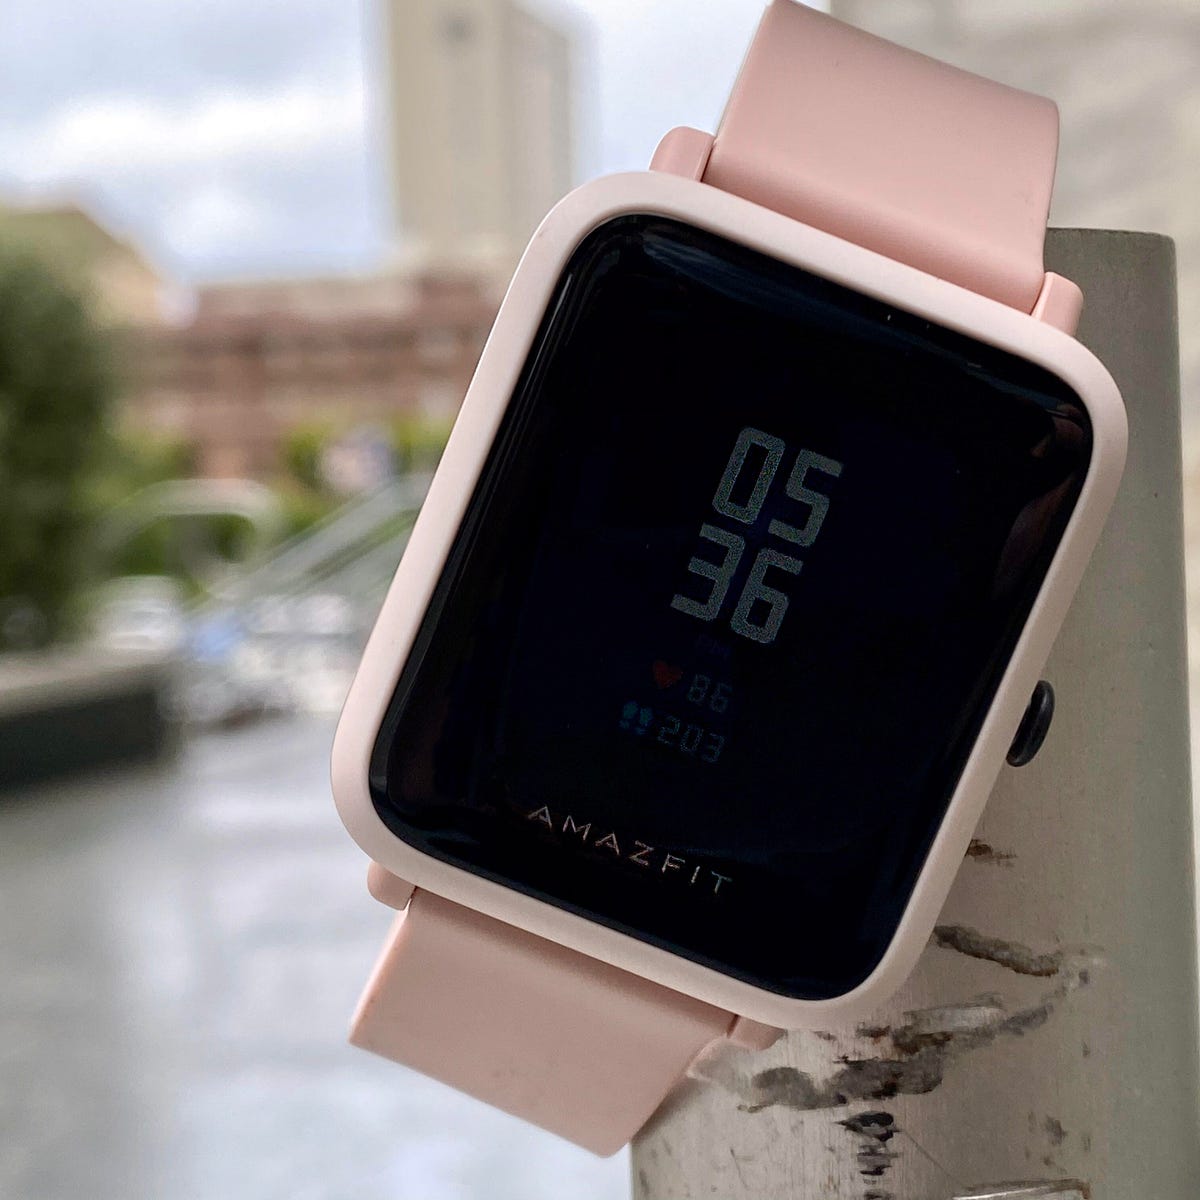 Amazfit Bip S smartwatch review: Price and battery life will smoke